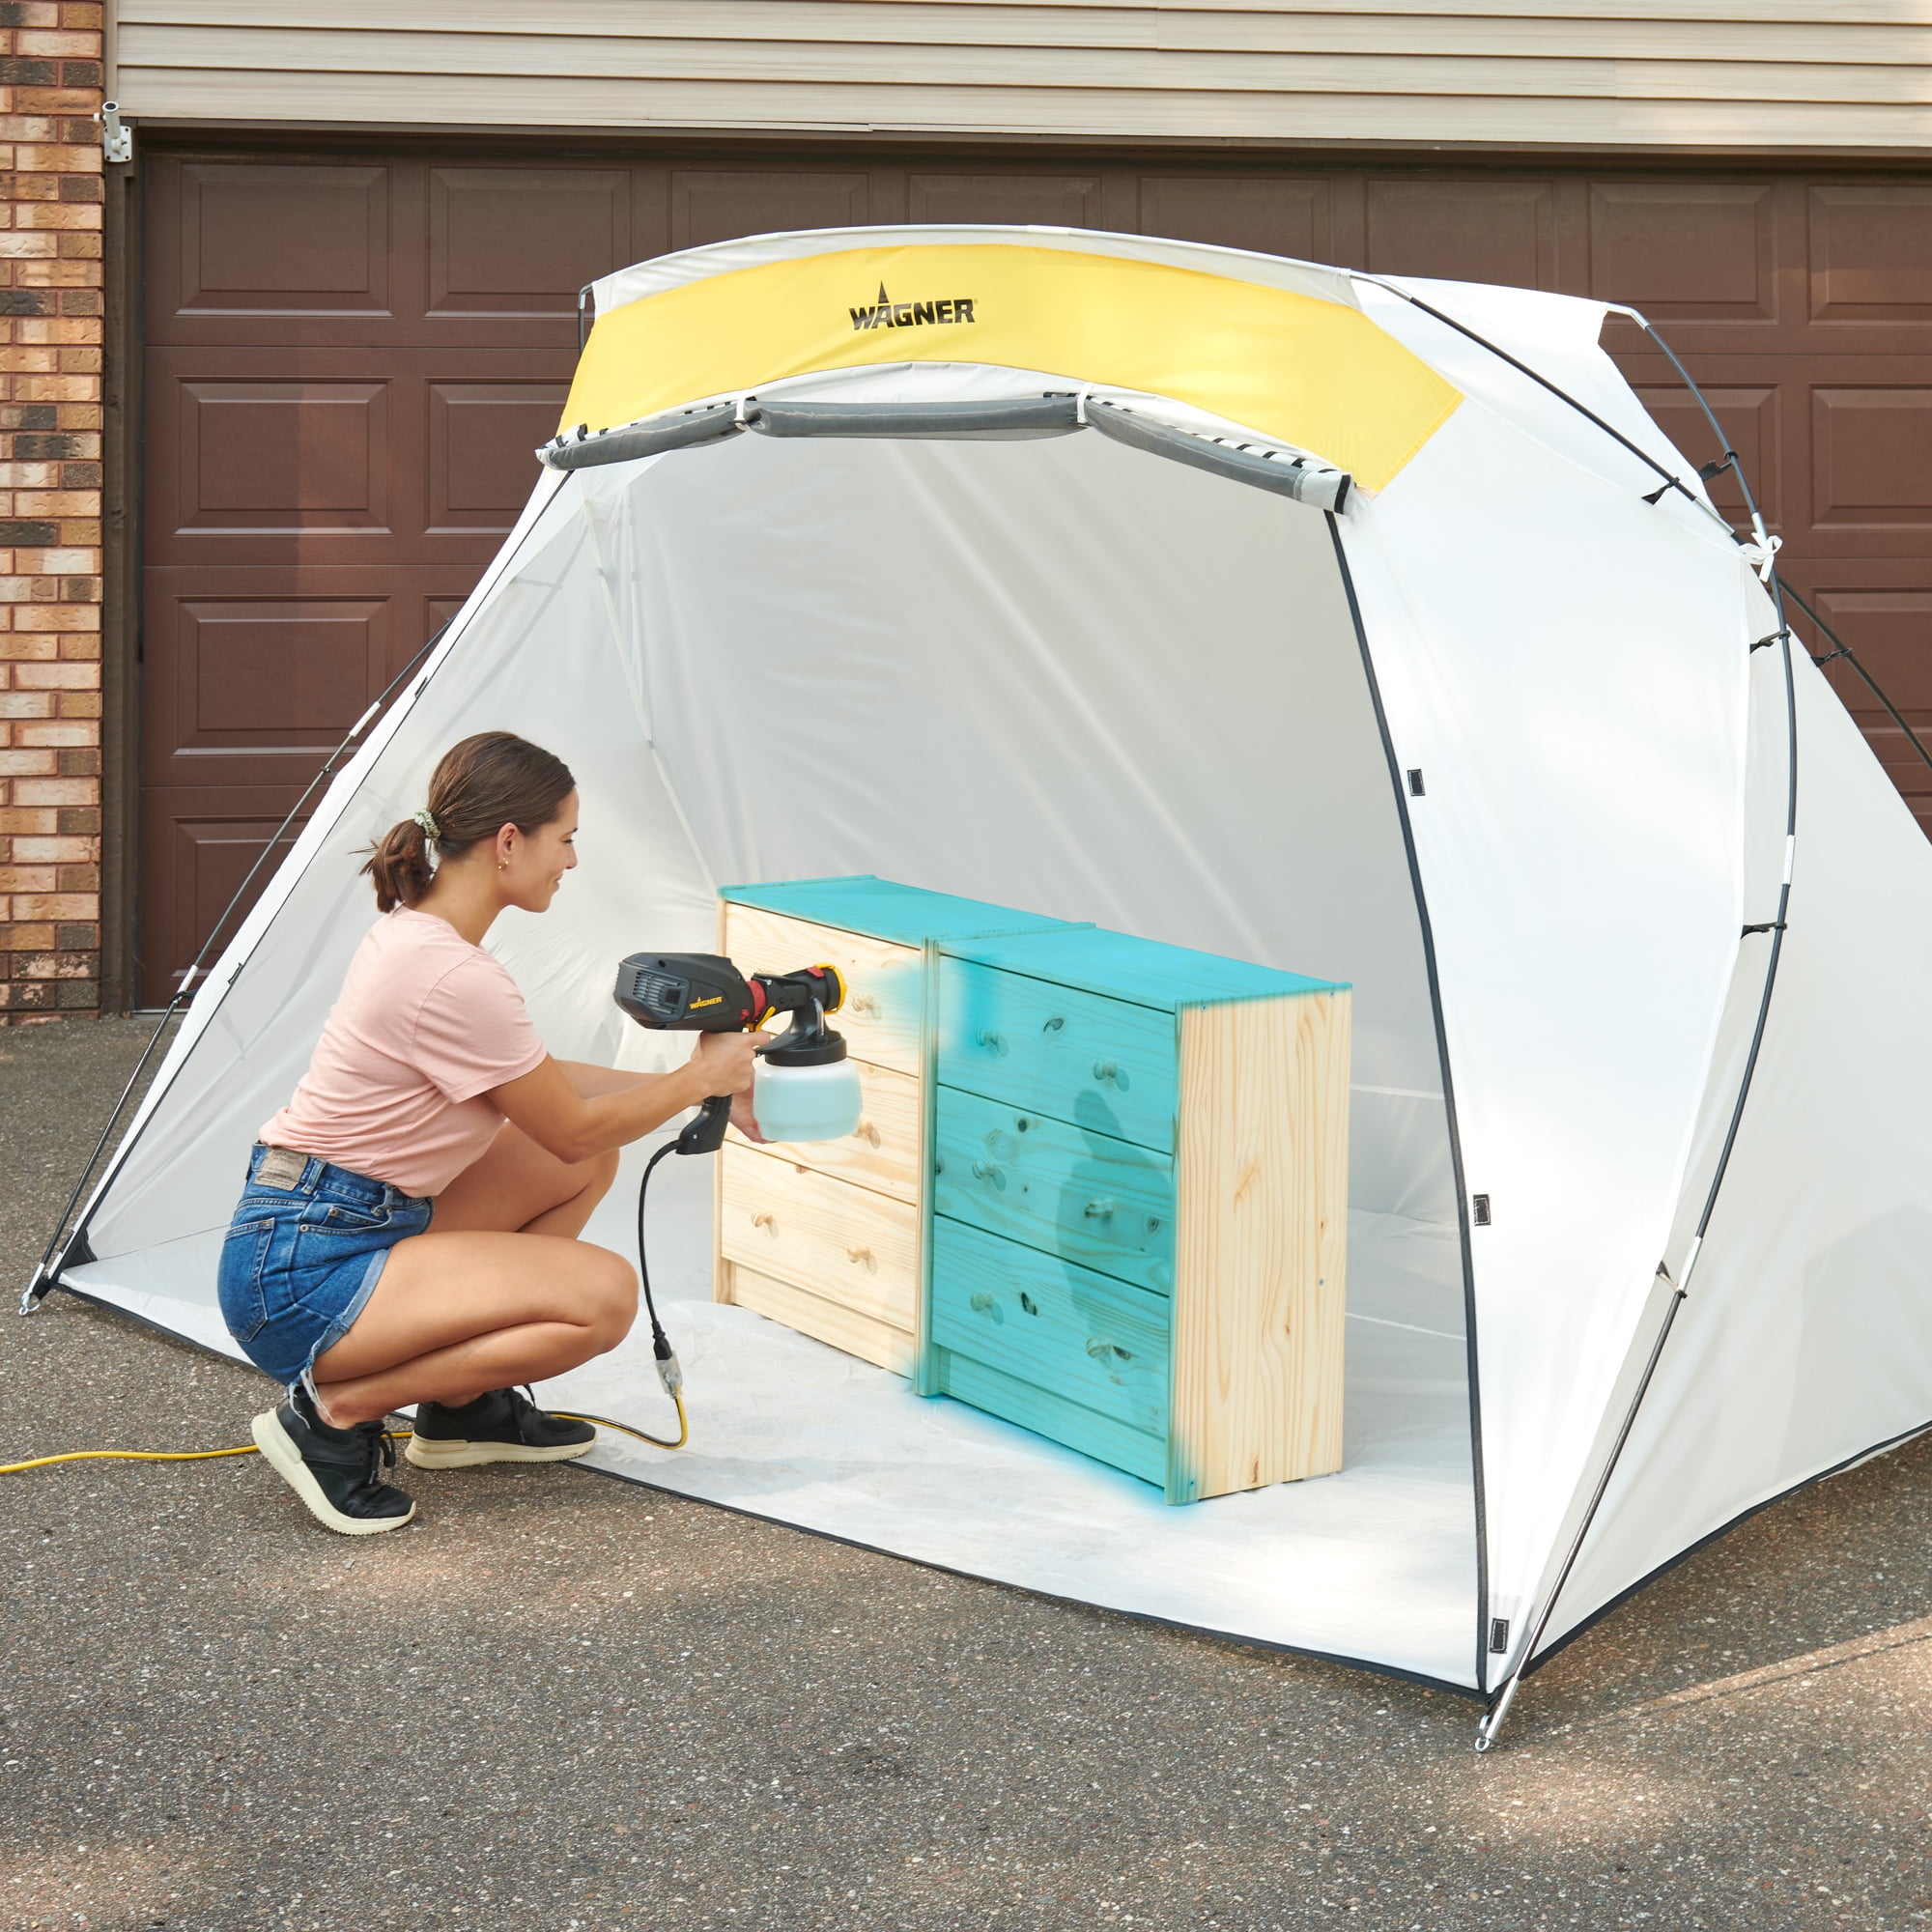 Sewinfla Spray shelter Portable Paint Booth Tent for DIY M Spray Painting  Easy